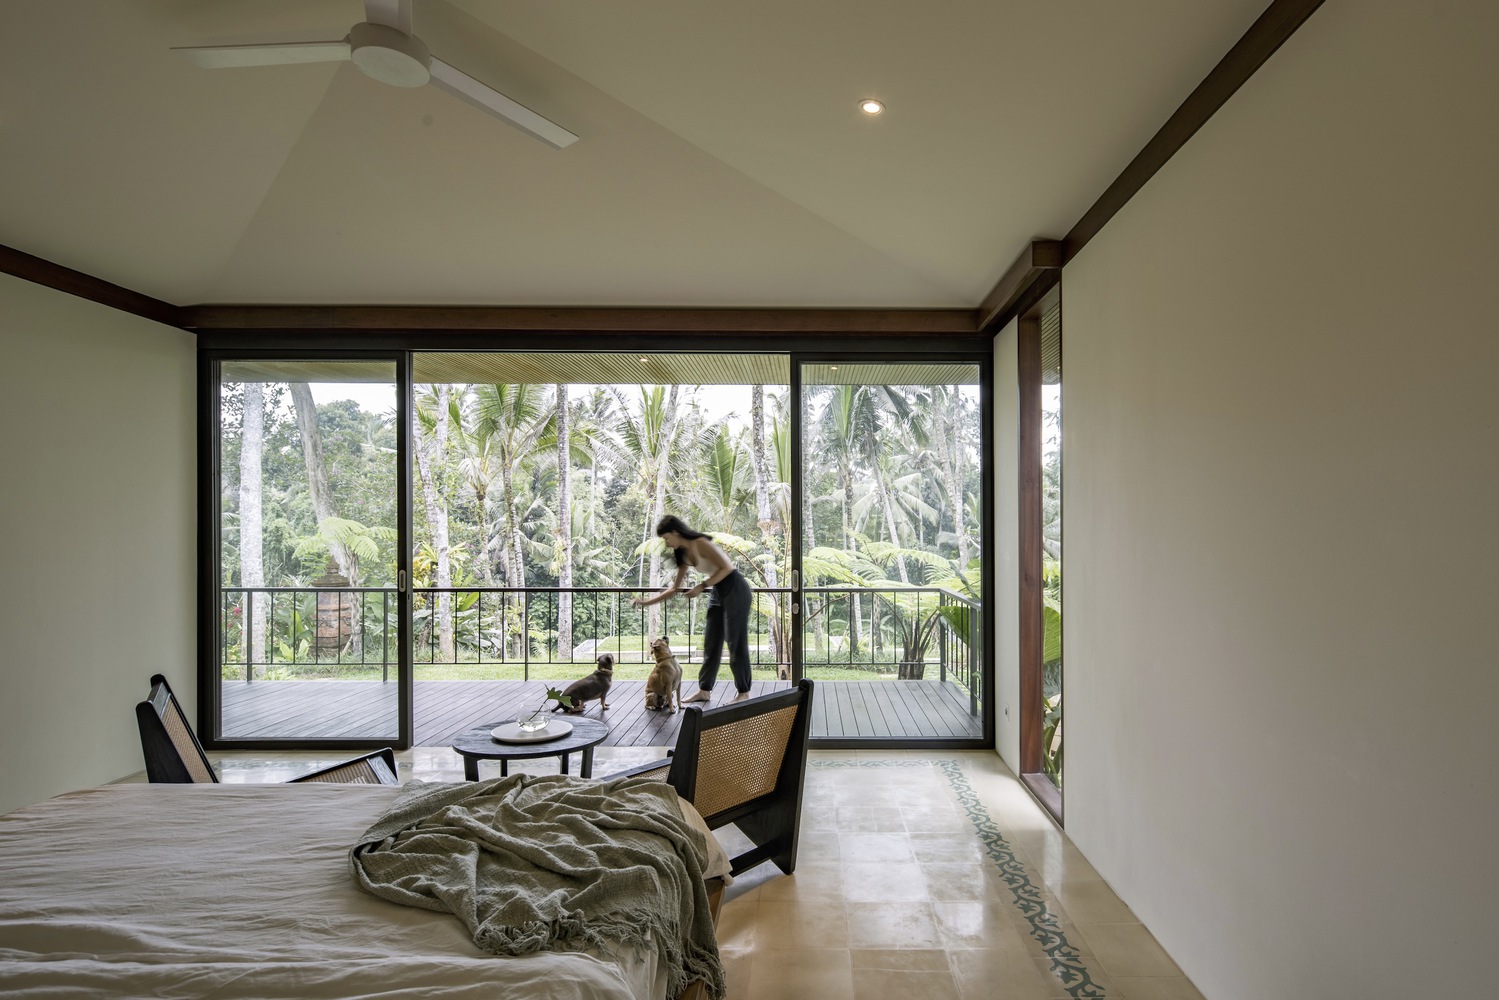 A bedroom that opens into a large balcony where a woman plays with her two dogs. Photo by Indra Wiras.